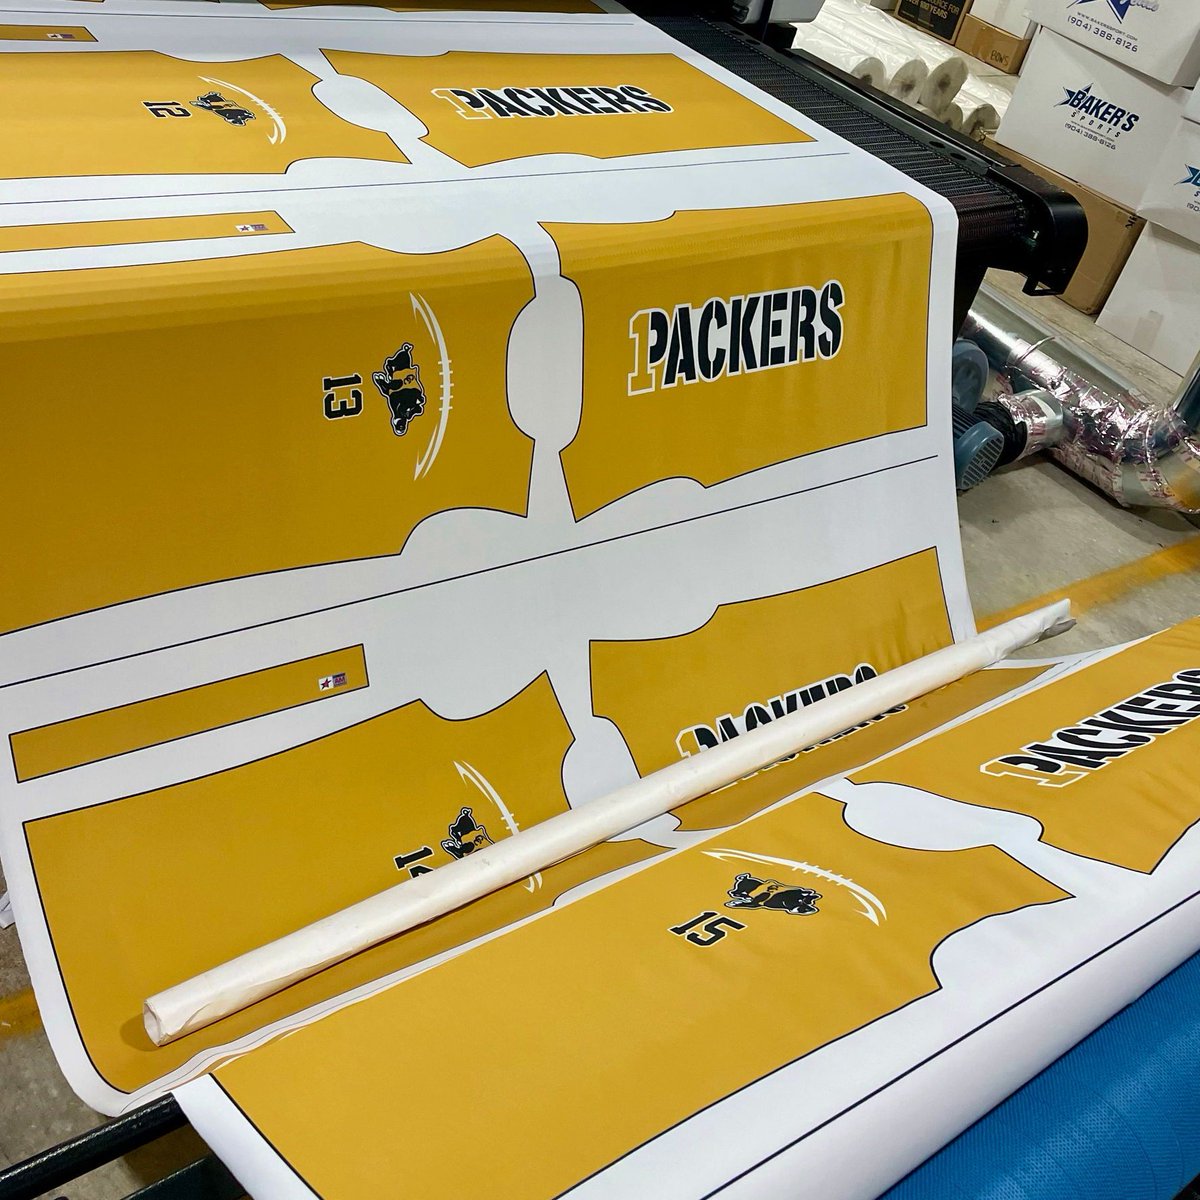 Lots of Colquitt County gear on the #BakersMade #ProductionLine lately!🐗⭐🏈 Shane Matthews (@SMniner) always makes it happen for these guys! @CCPackersFball #MadeInTheUSA #Embroidery #Sublimation #Screenprint #HeatPress #TeamSports #SportsApparel #Football #SouthGA #GOPACK